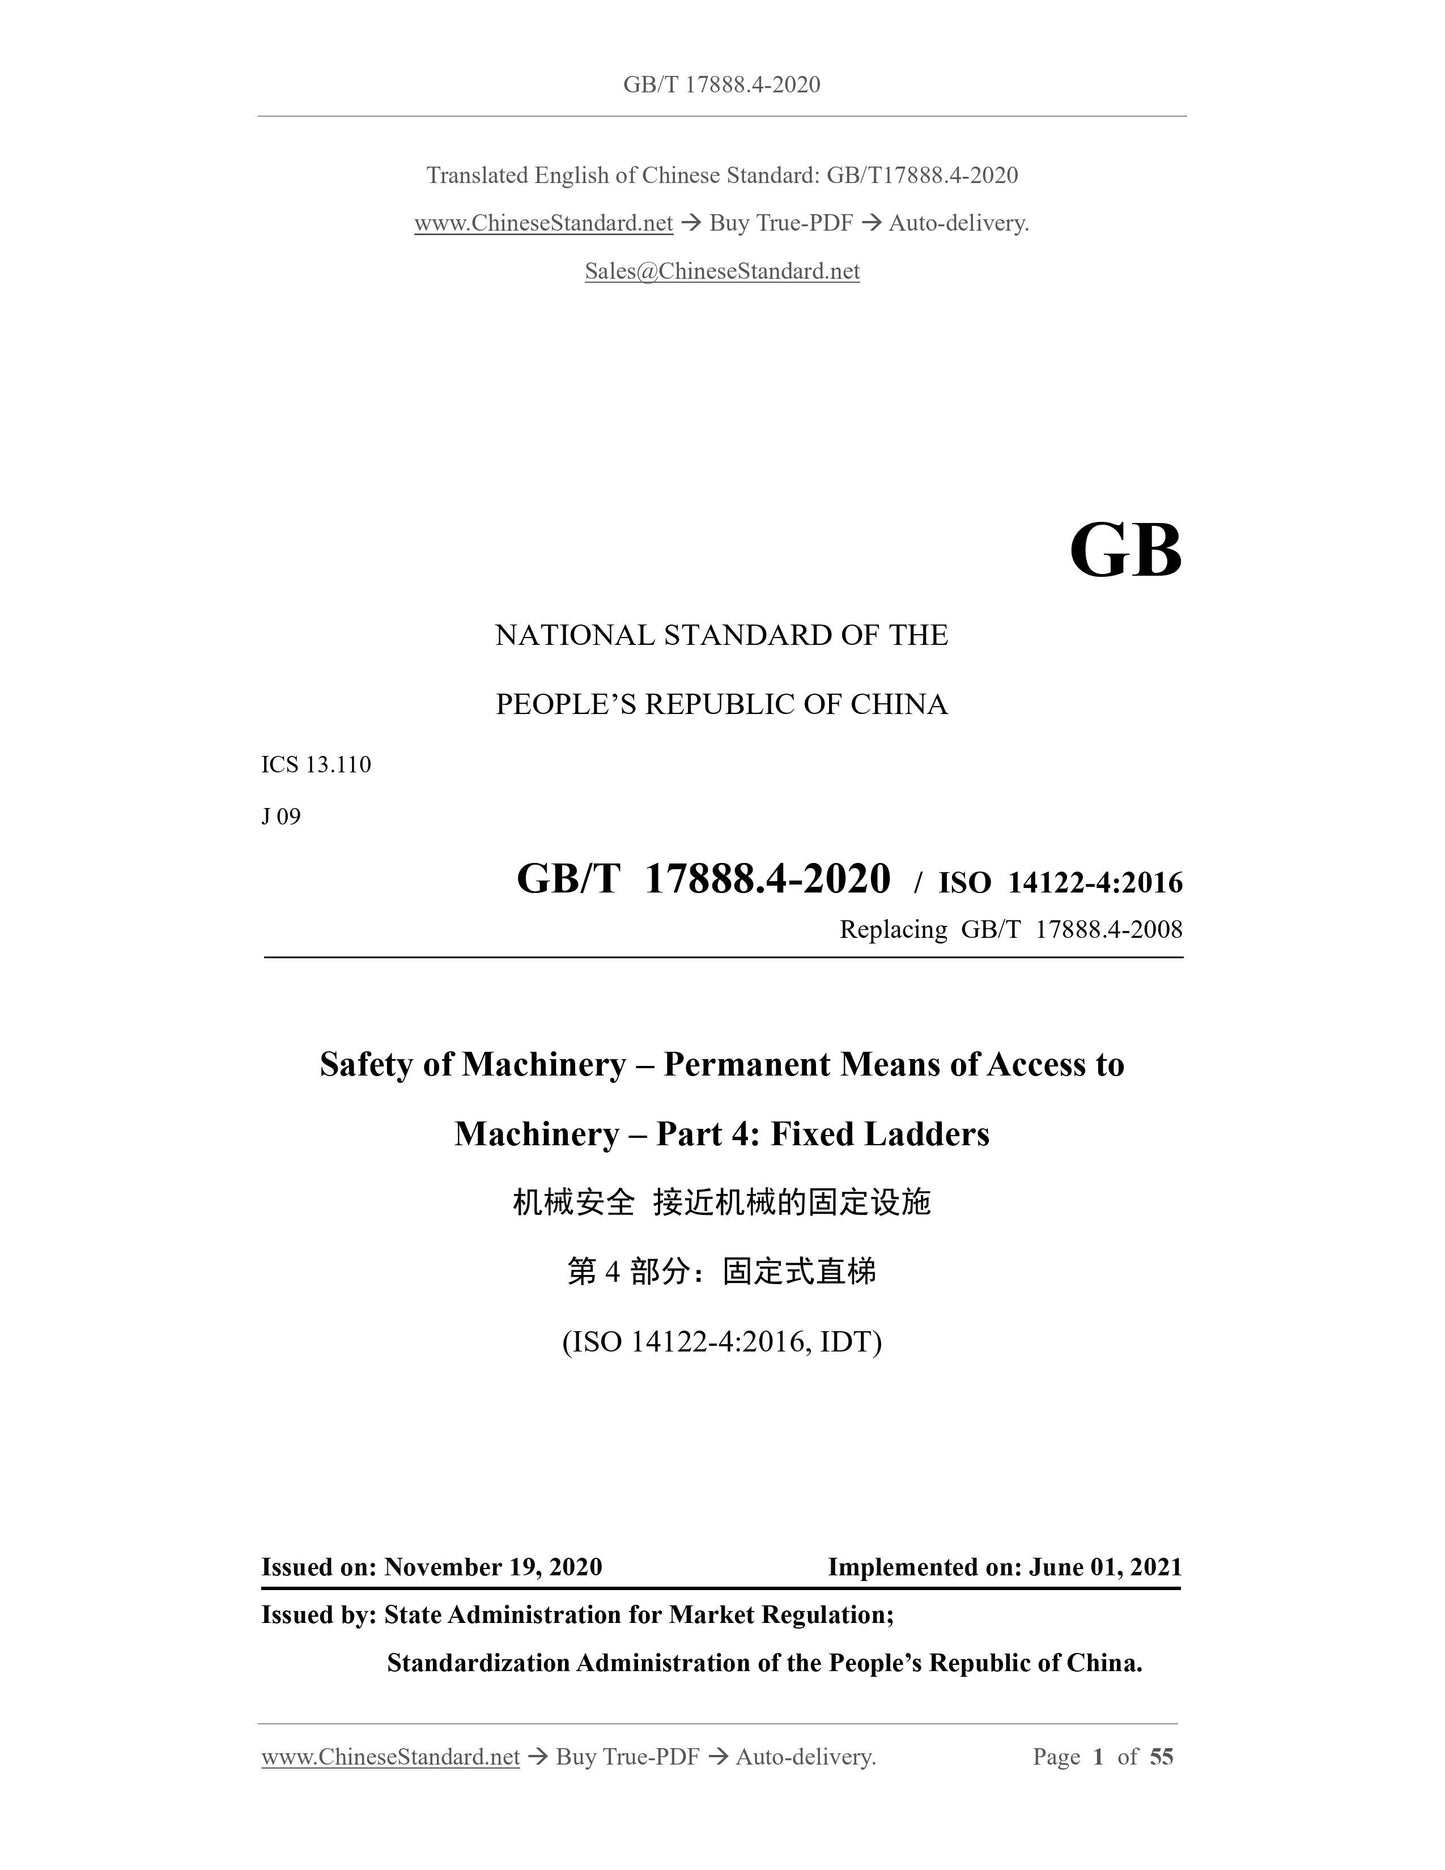 GB/T 17888.4-2020 Page 1